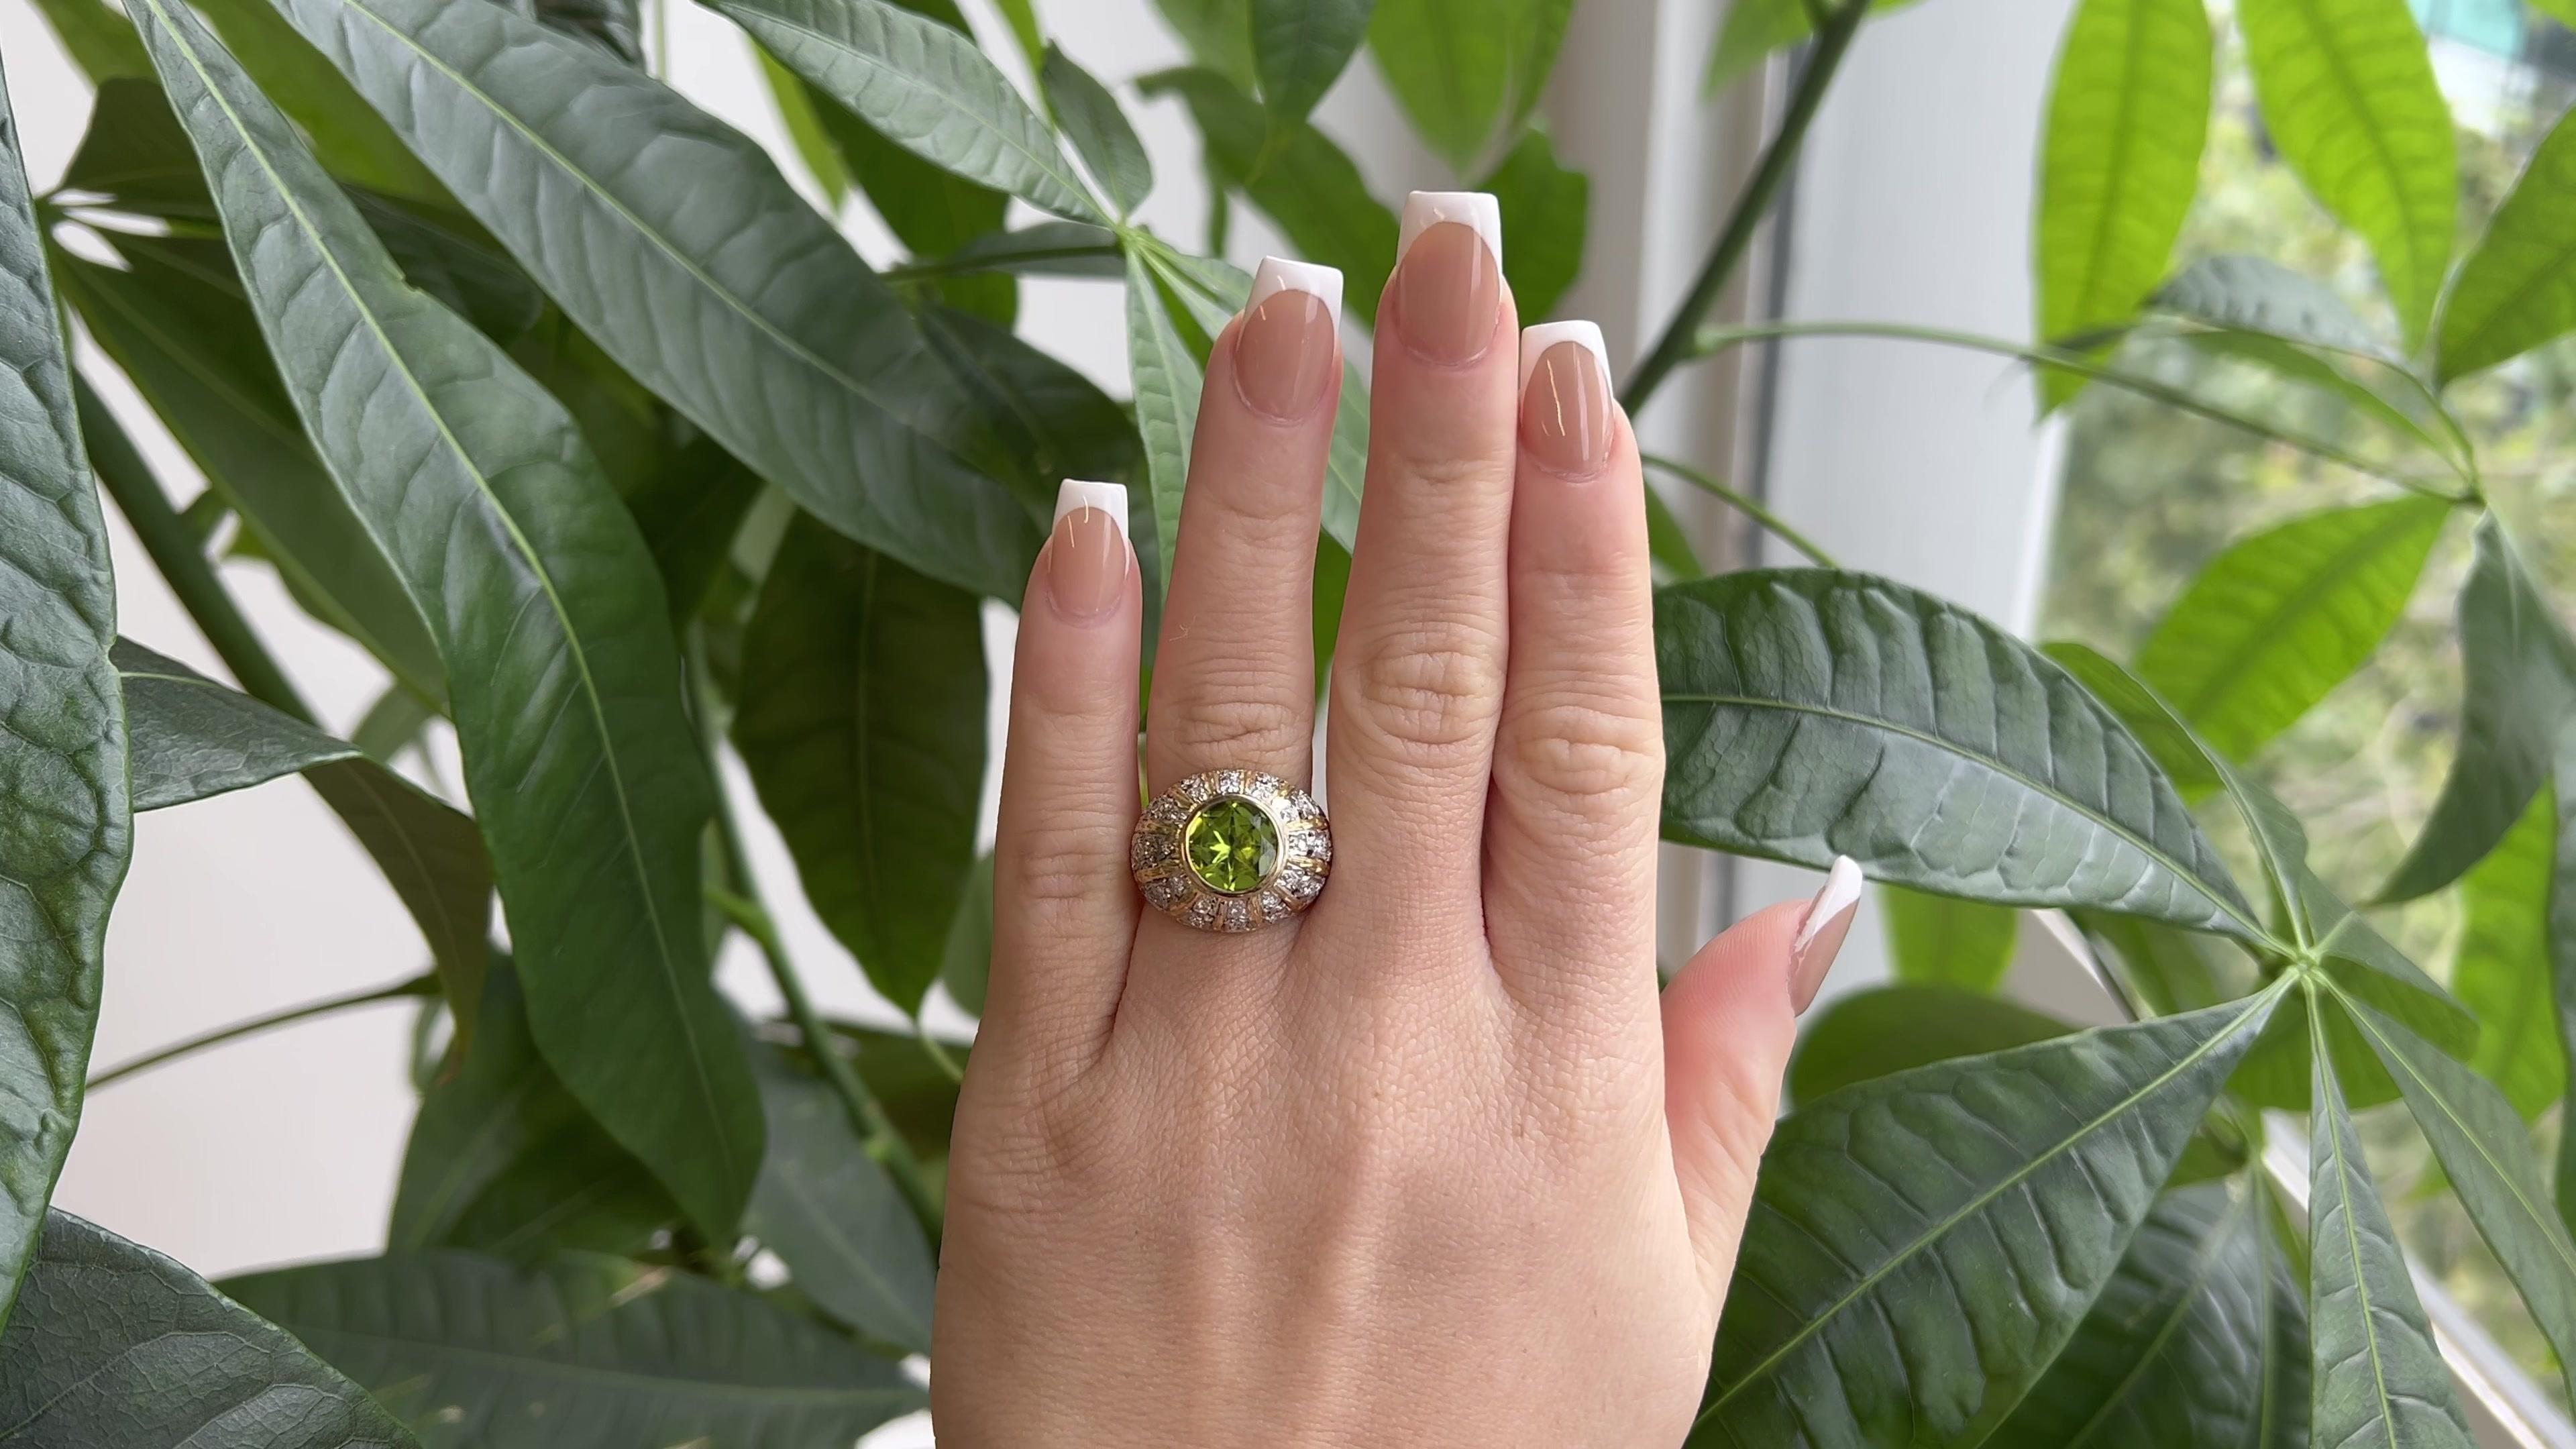 One Mid Century Mario Buccelatti Italian Peridot Diamond 18 Karat Gold Bezel Set Dome Ring. Featuring one round peridot of approximately 2.90 carats. Accented by 32 round brilliant cut diamonds with a total weight of approximately 0.70 carat, graded